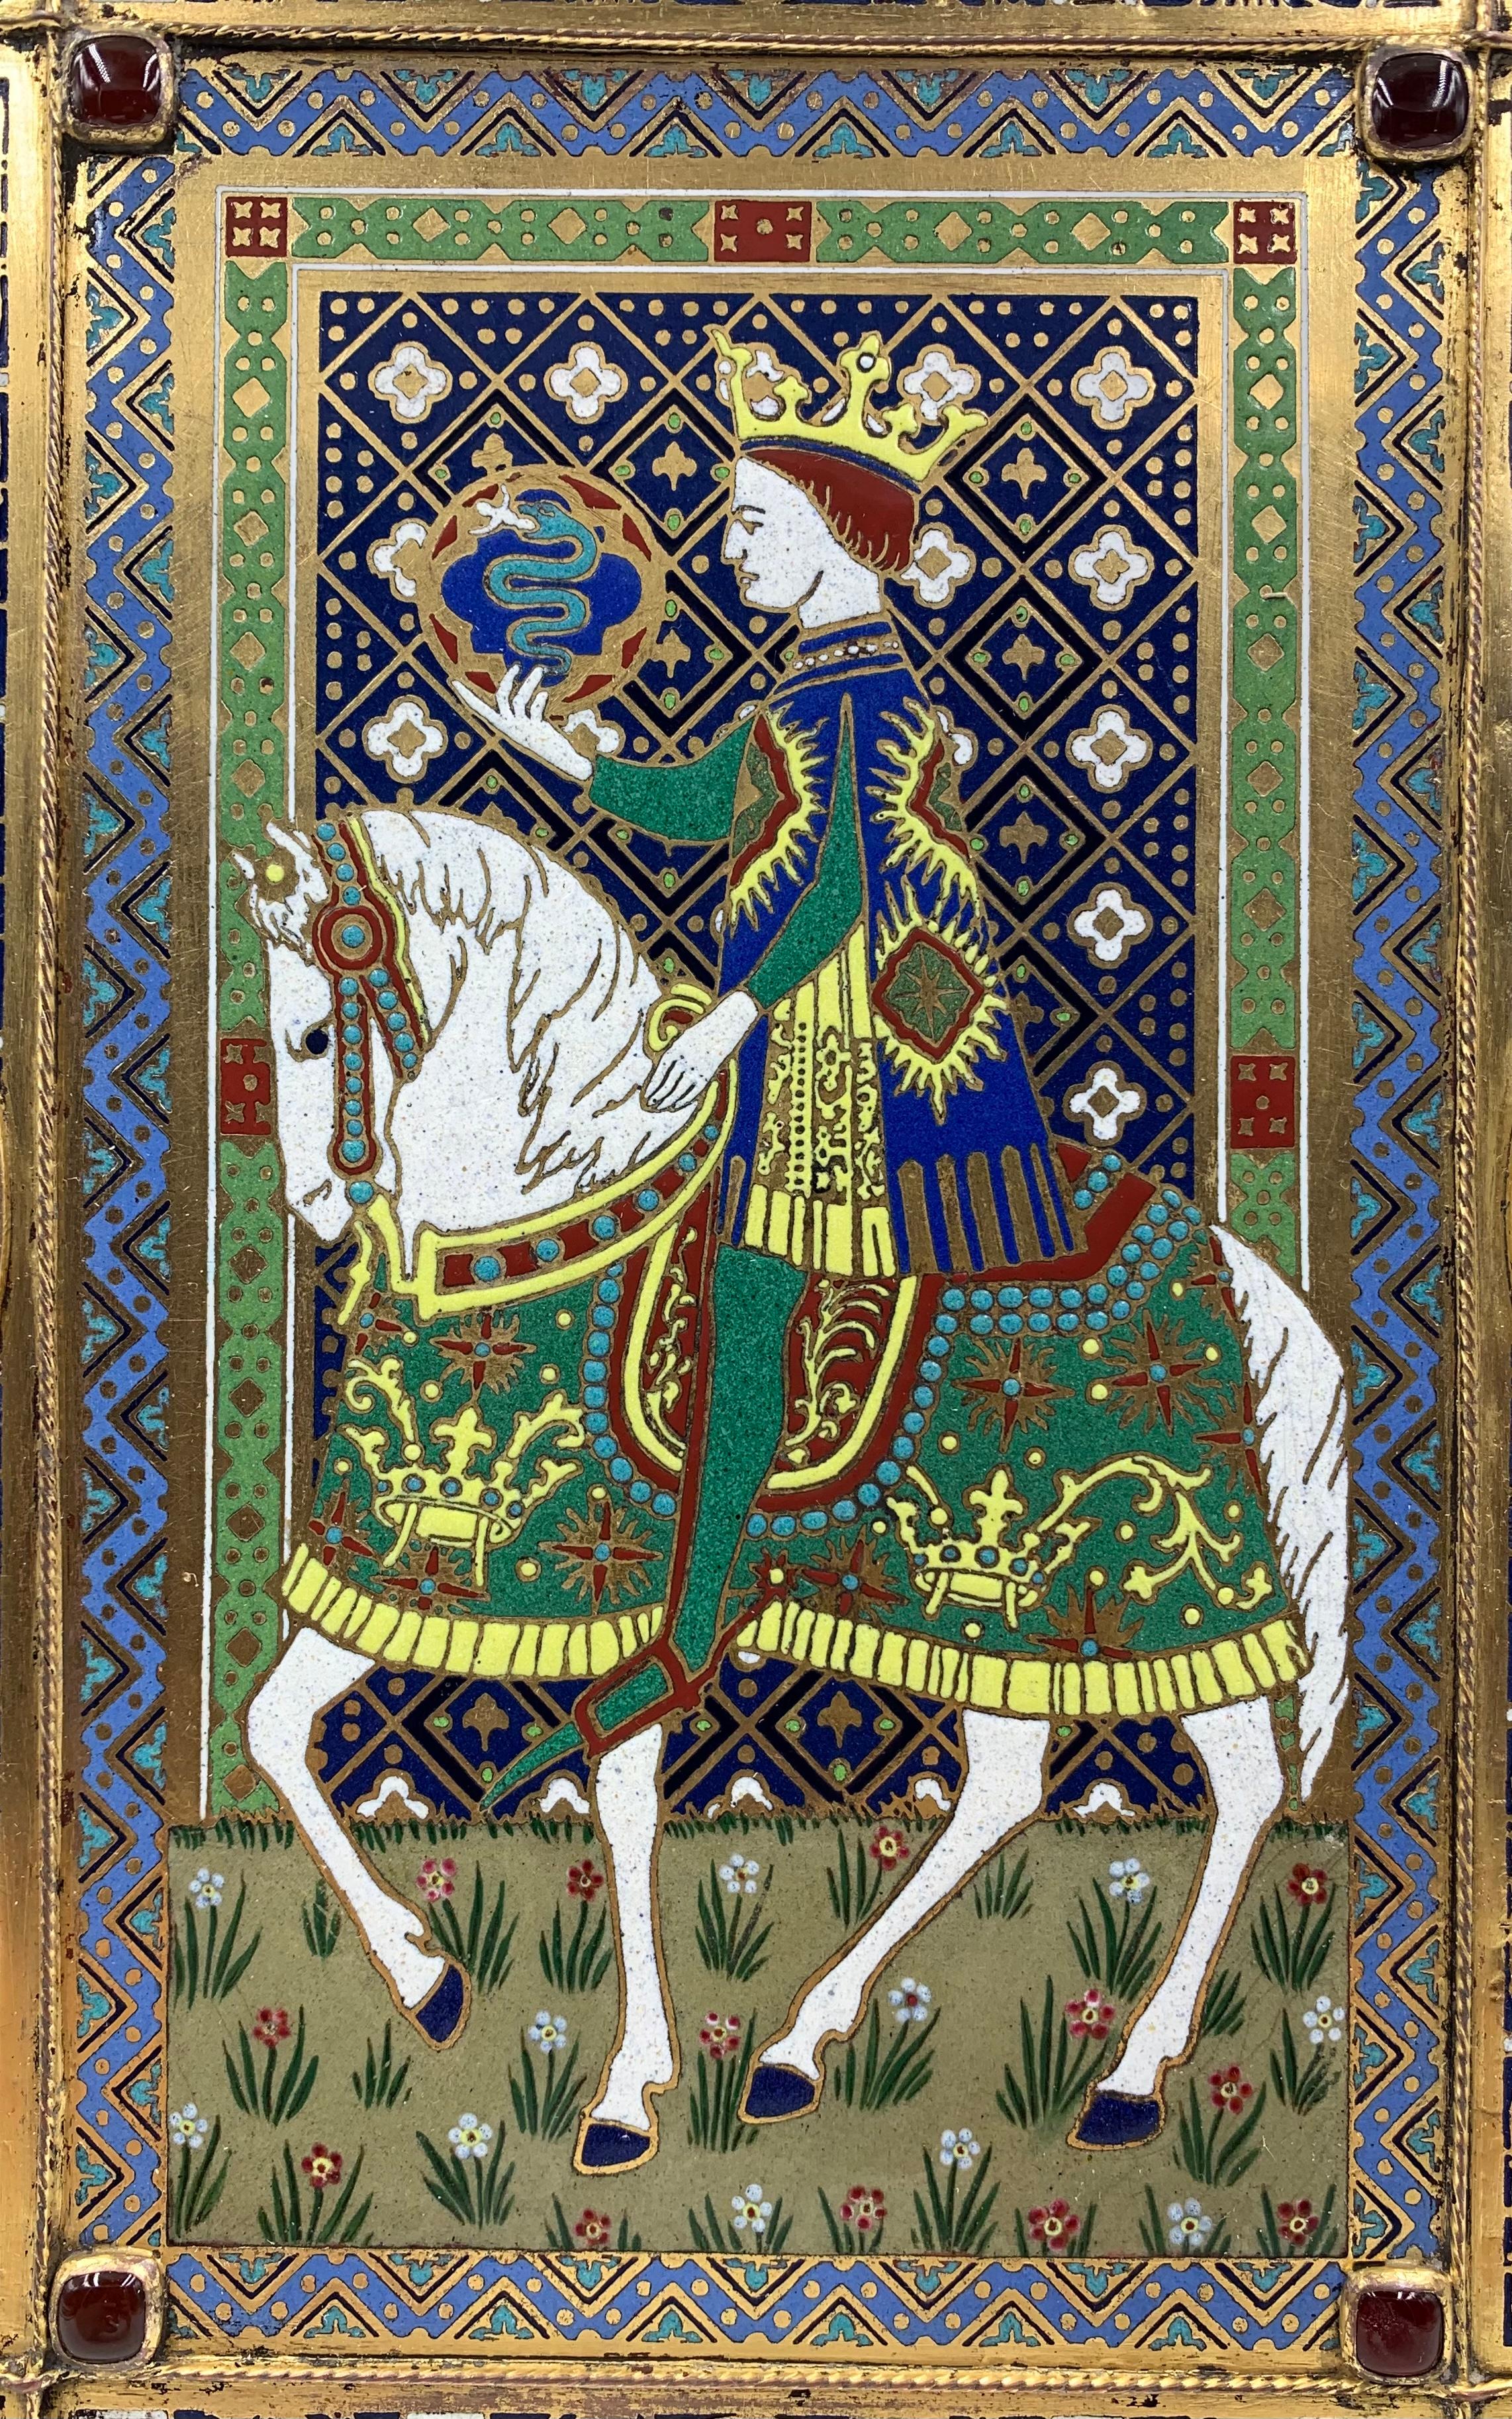 A very rare, fine large Edward F. Caldwell jeweled champleve enamel folio cover in the High Gothic Style. The central panel depicting a King on a white horse holding a large orb with a snake symbol, surrounded by exquisitely detailed Gothic heraldic